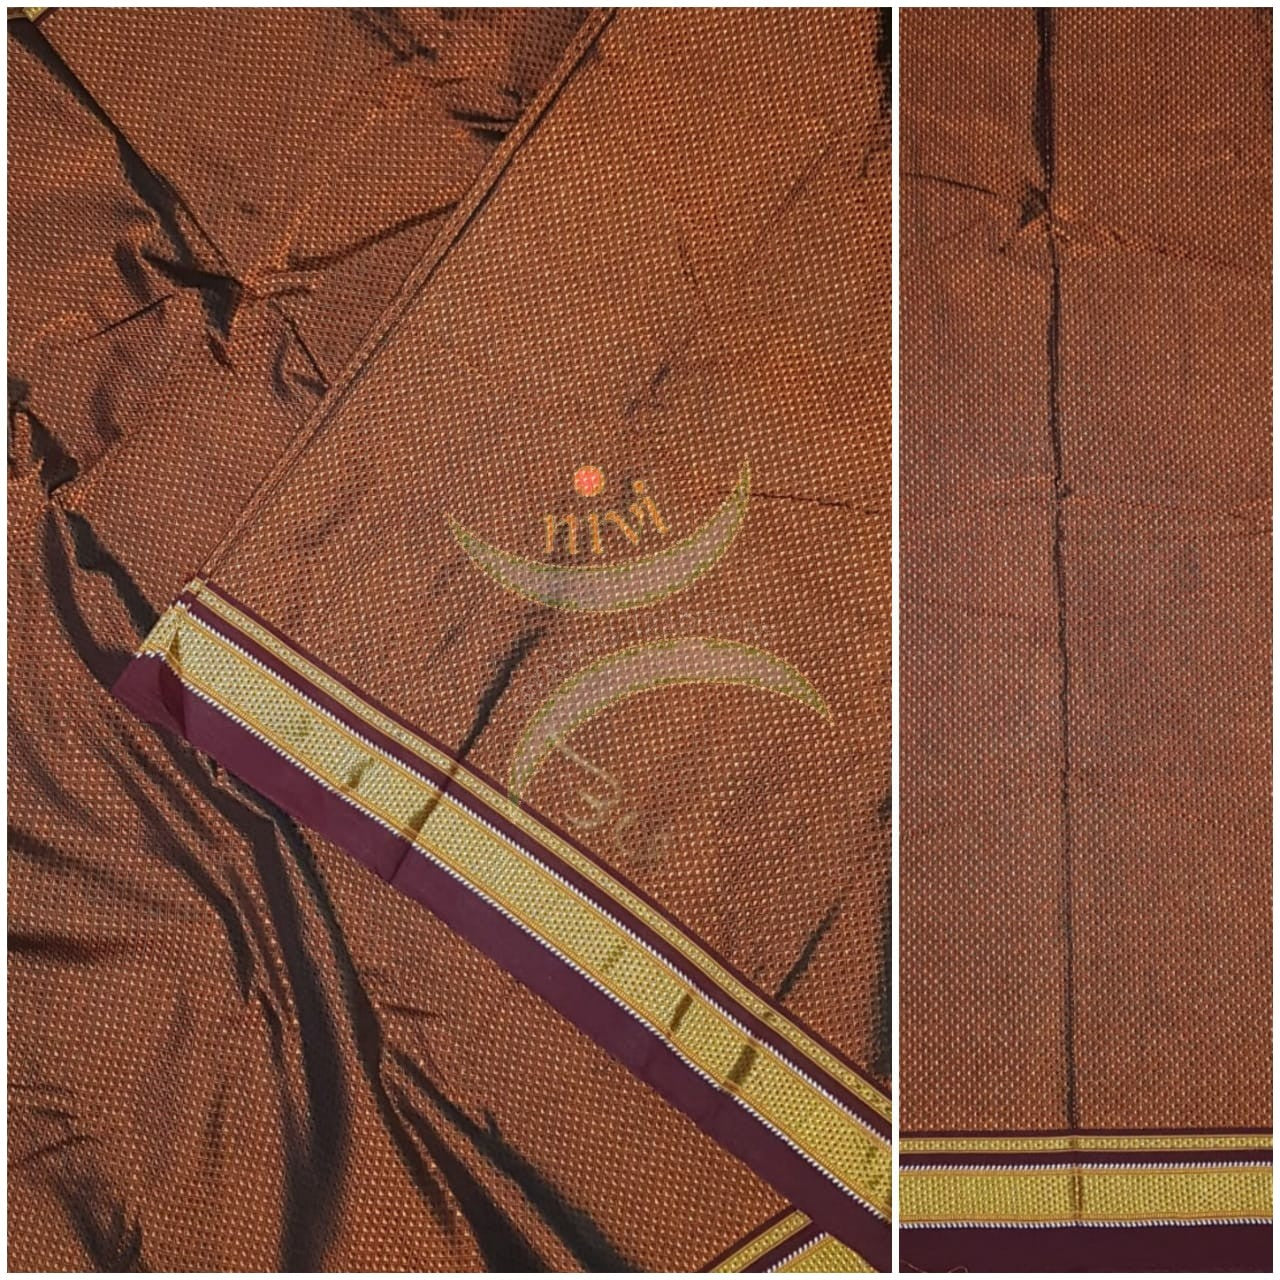 Brown Khun/khana running material with maroon border. Width of the fabric is 29 inches.